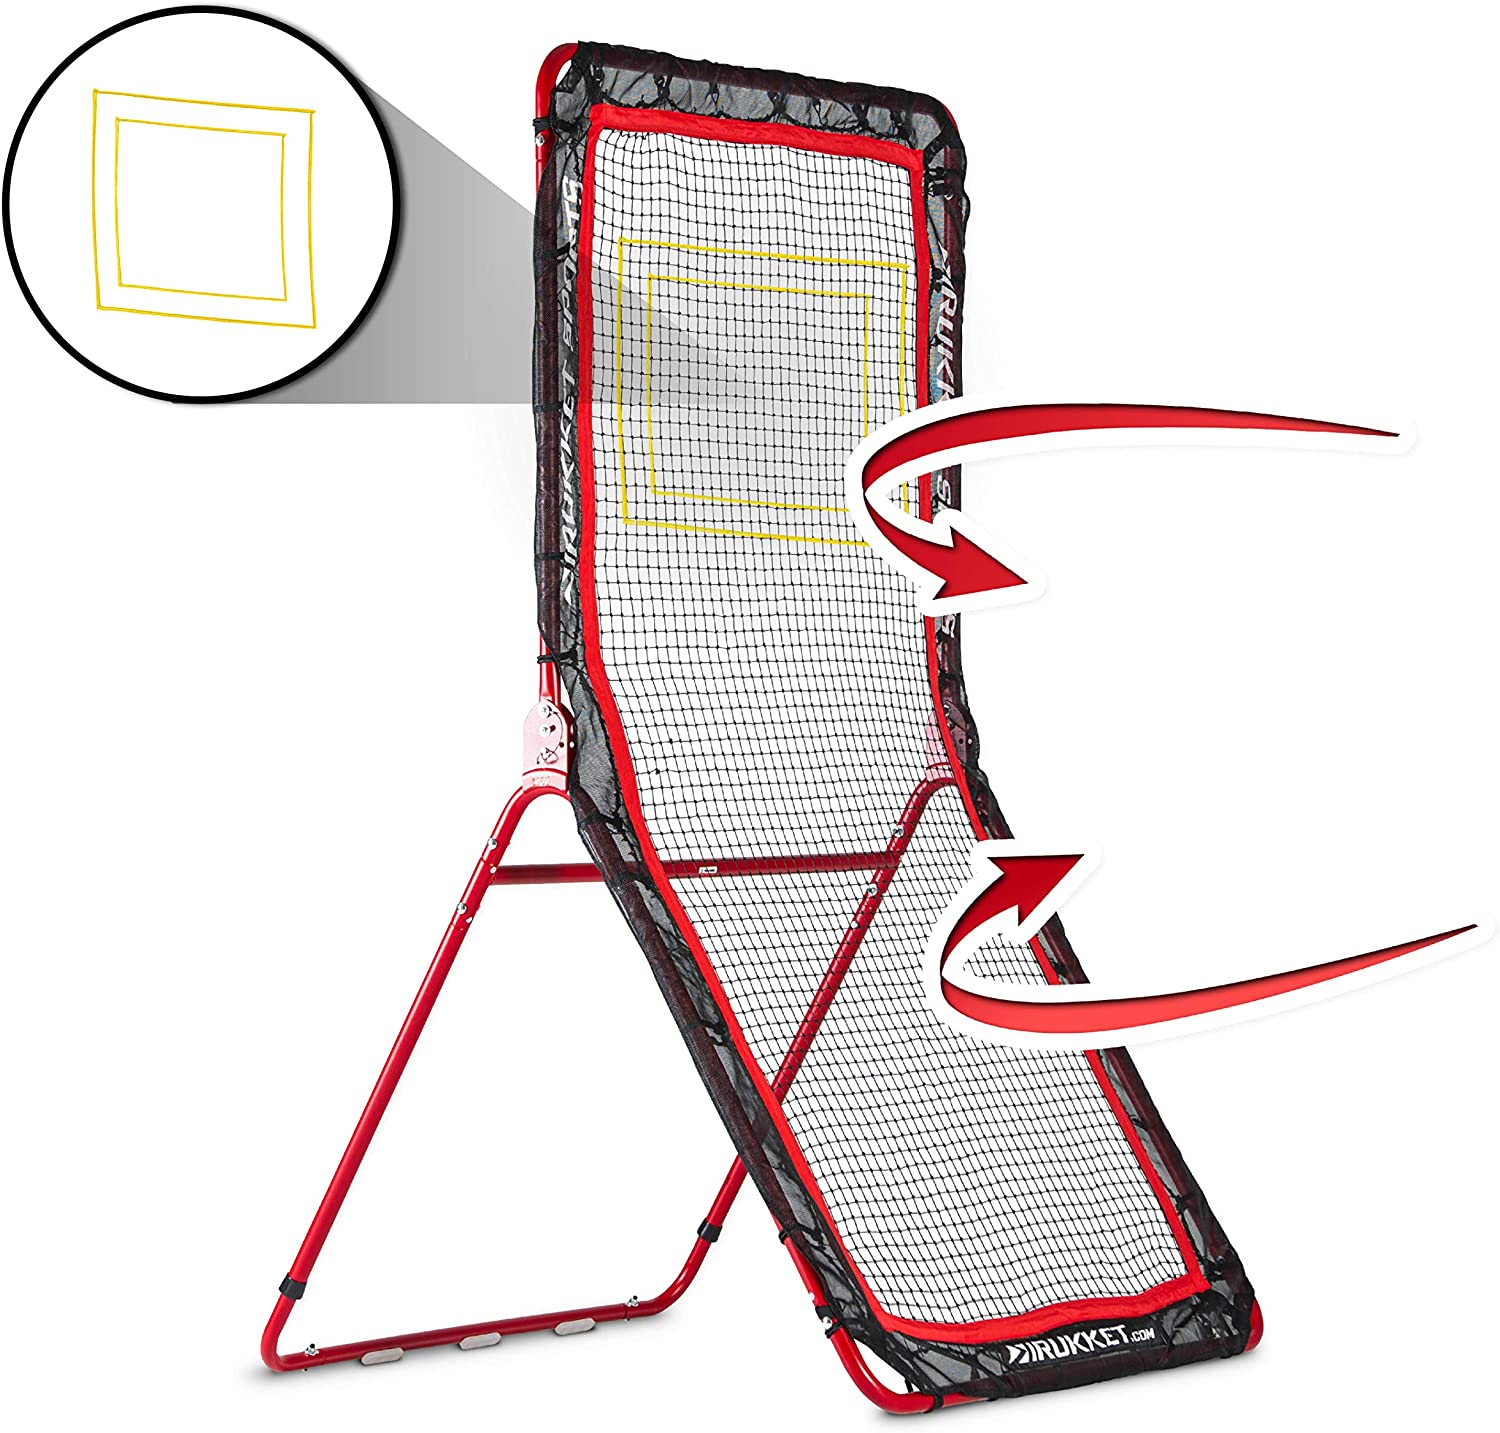 Multi-Sport Details about   RapidFire RF150 Rebounder Double-Sided Portable Rebound Net 